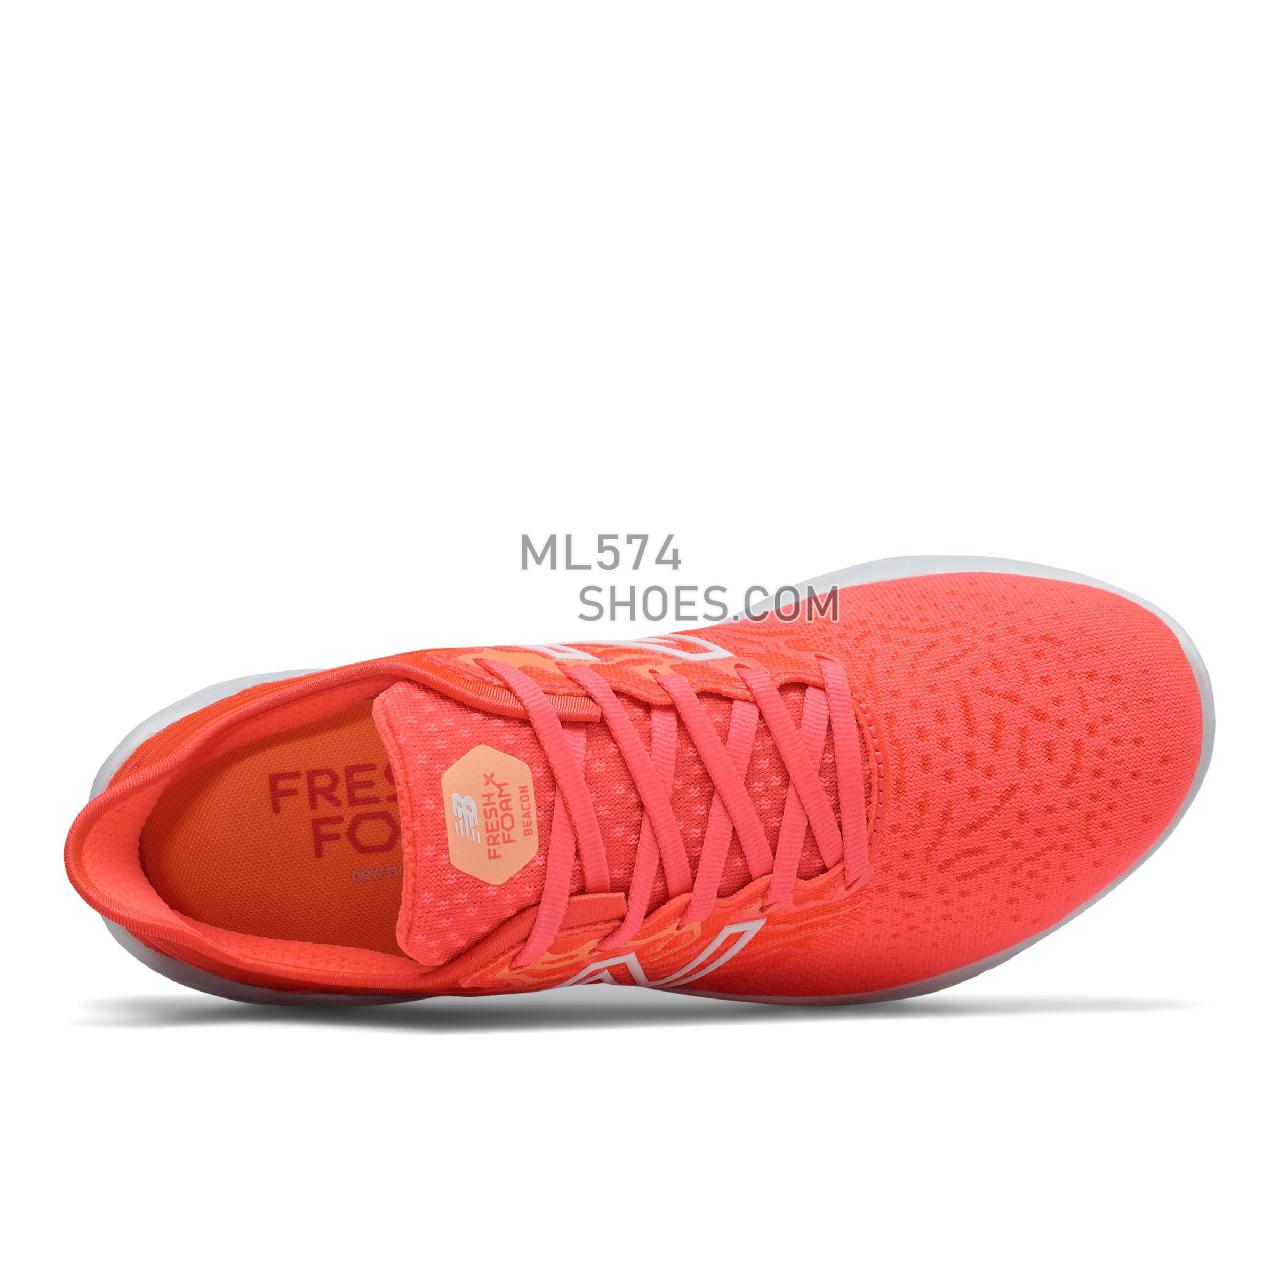 New Balance Fresh Foam Beacon v3 - Women's Neutral Running - Vivid Coral with Citrus Punch - WBECNCP3